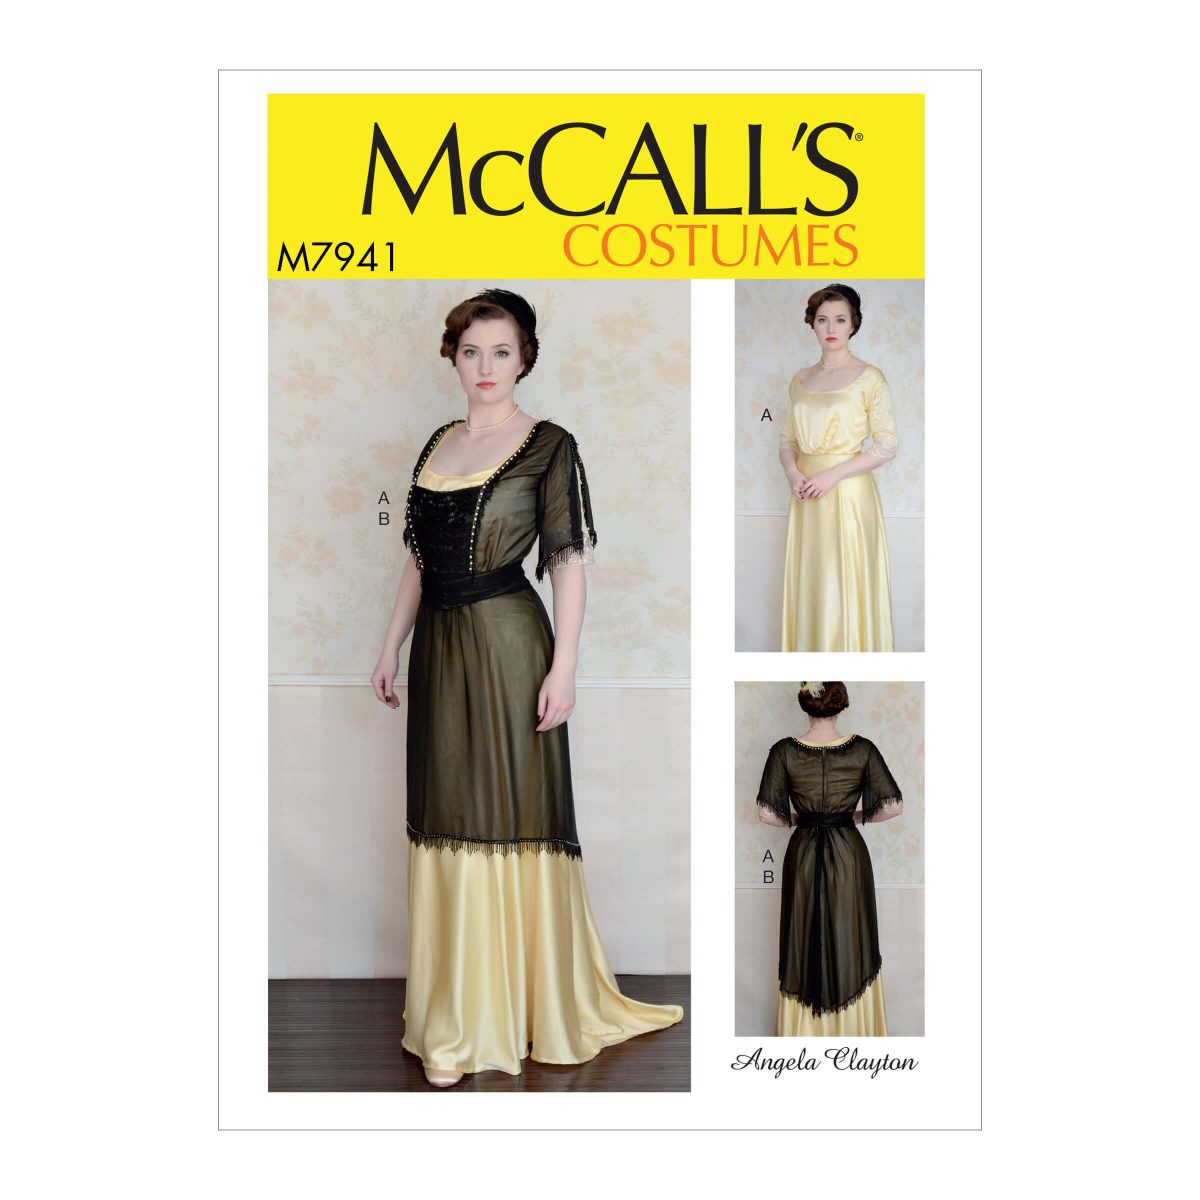 McCall's Sewing Pattern M7941 Misses' Costume by Angela Clayton